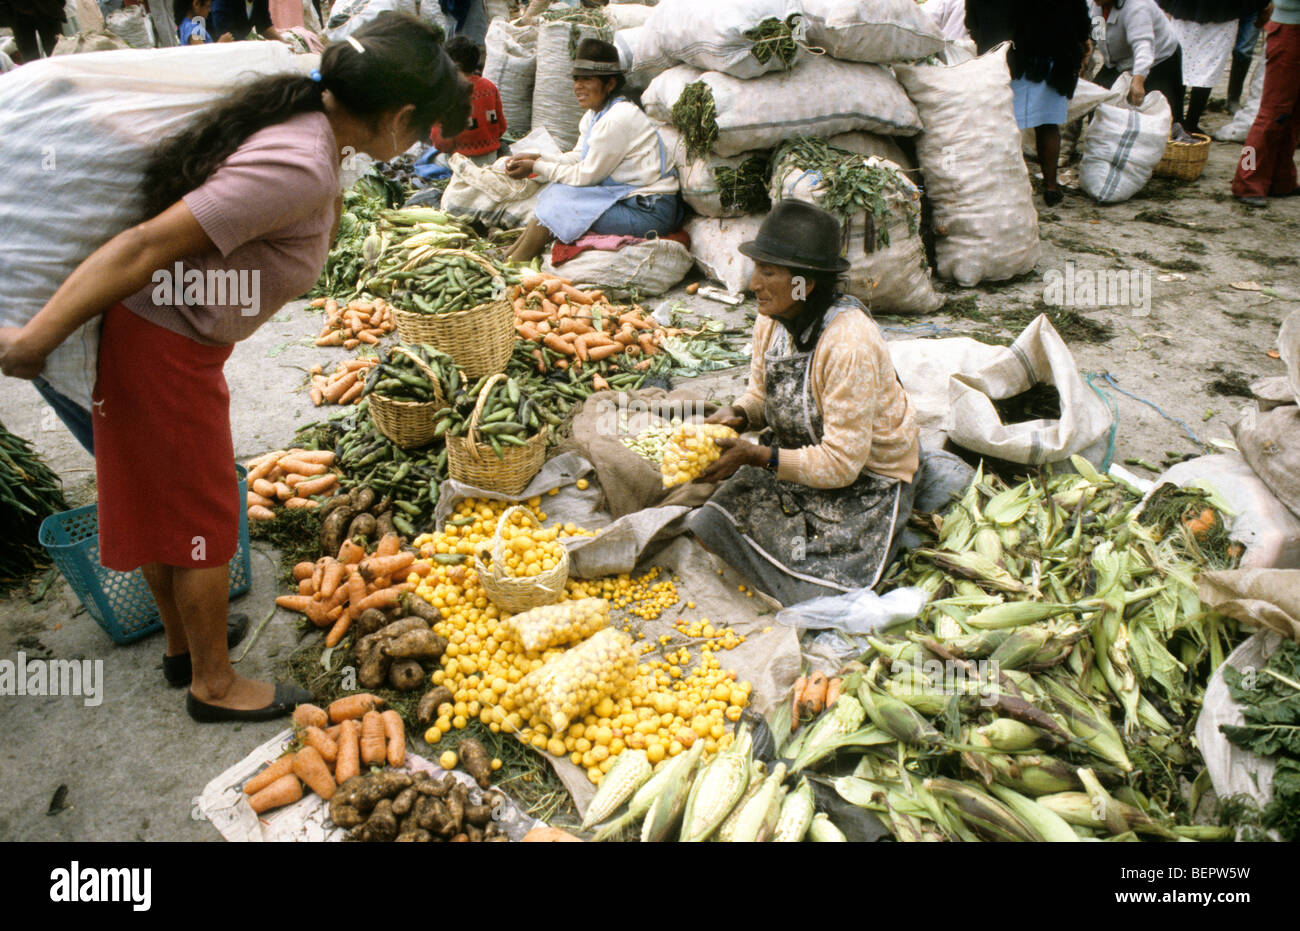 Older woman sitting in the midst of pile of different fresh vegetables in local upland Ecuador market. Stock Photo